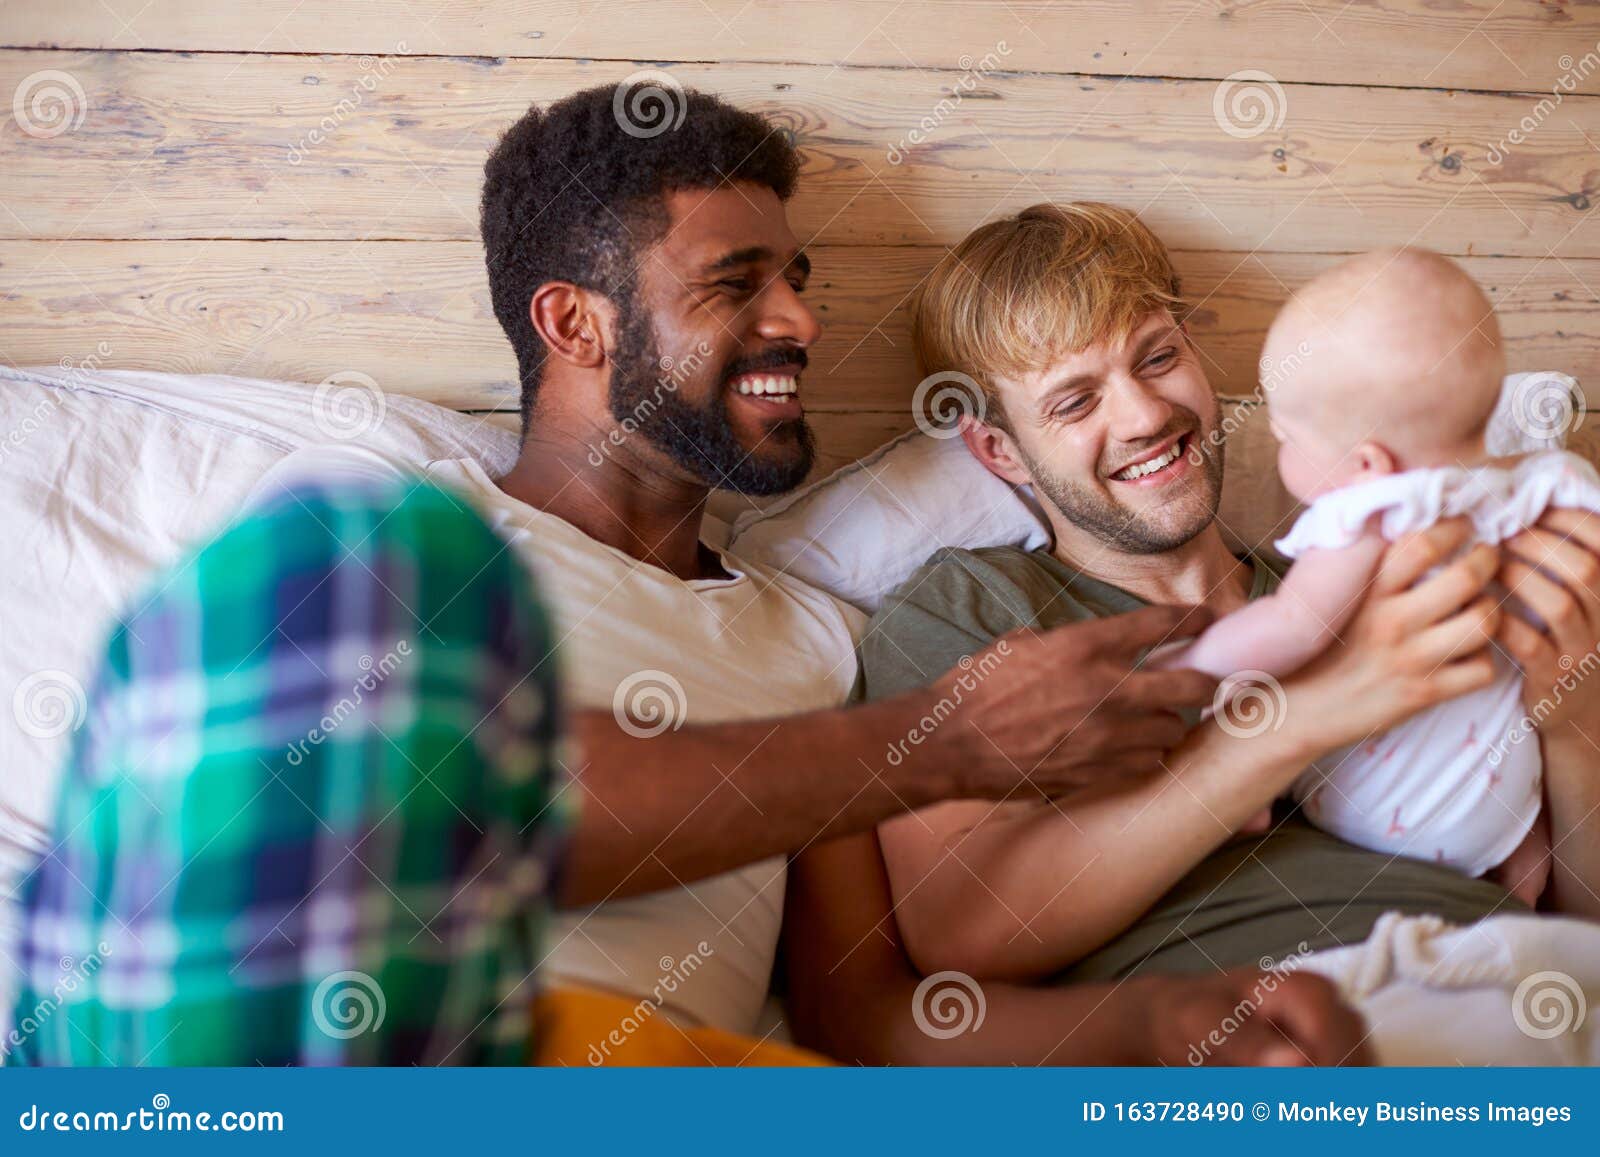 Raj Wap Xxx Vidio Bedroom Silping Mom And Sun Sex - Loving Male Same Sex Couple Cuddling Baby Daughter in Bedroom at Home  Together Stock Photo - Image of living, girl: 163728490